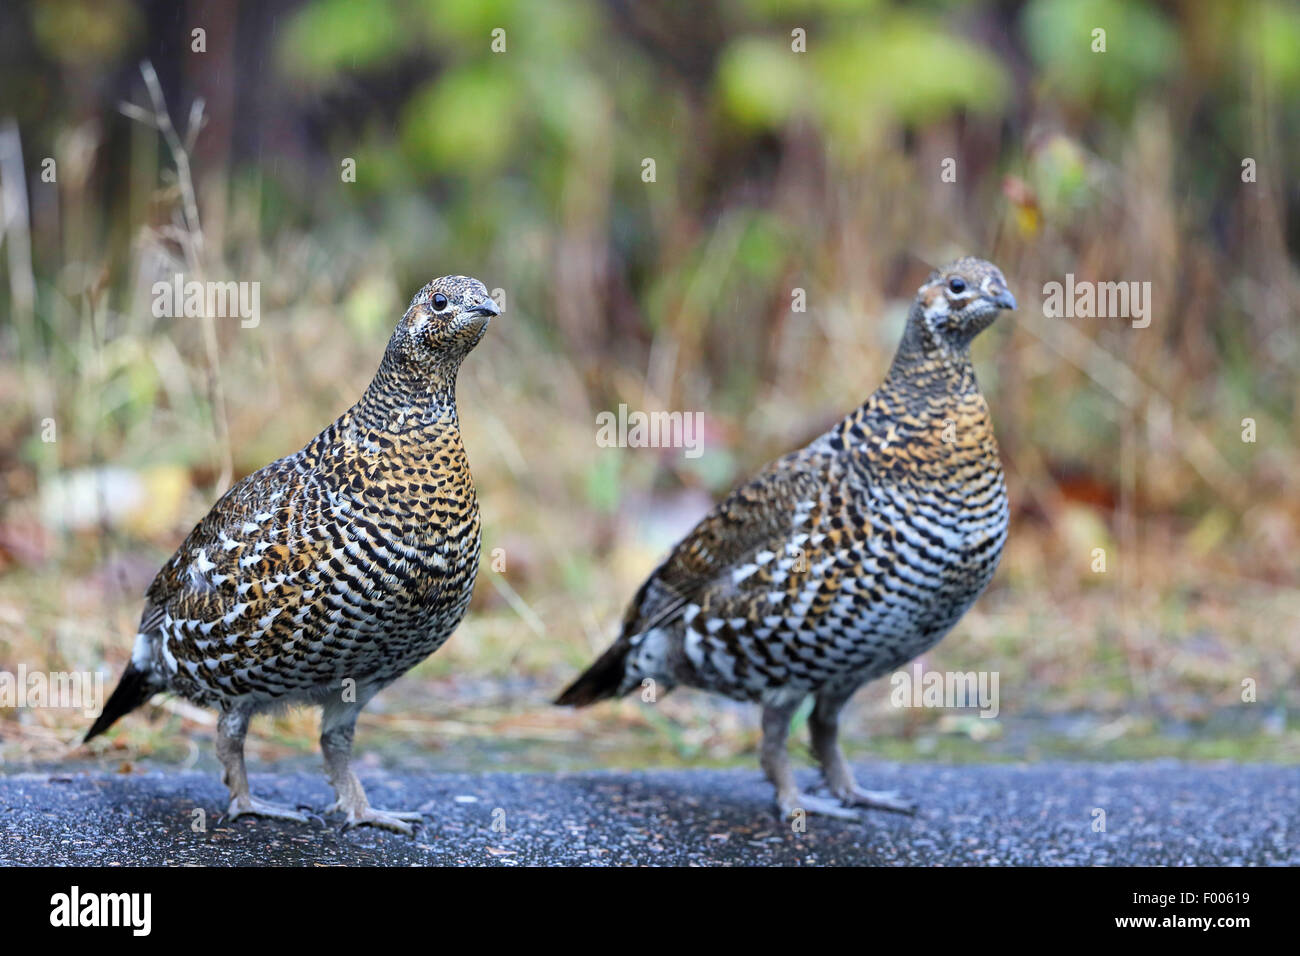 Spruce grouse (Dendragapus canadiensis), two grouses stand at the forest edge, Canada, Ontario, Algonquin Provincial Park Stock Photo